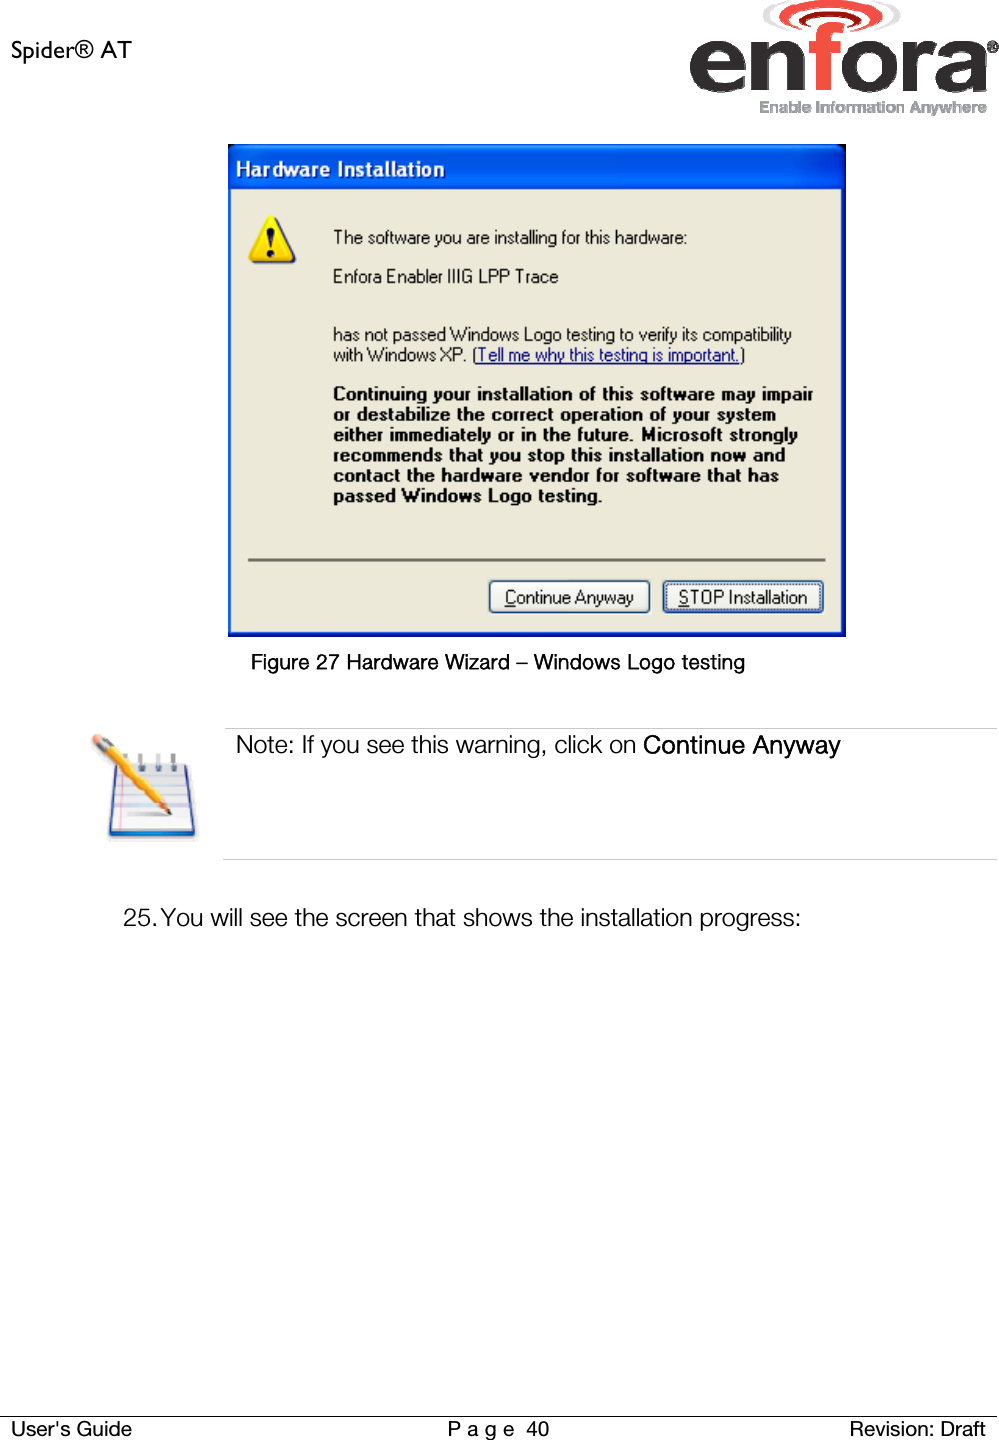 Spider® AT     User&apos;s Guide  P a g e 40 Revision: Draft  Figure 27 Hardware Wizard – Windows Logo testing   Note: If you see this warning, click on Continue Anyway  25. You will see the screen that shows the installation progress:  